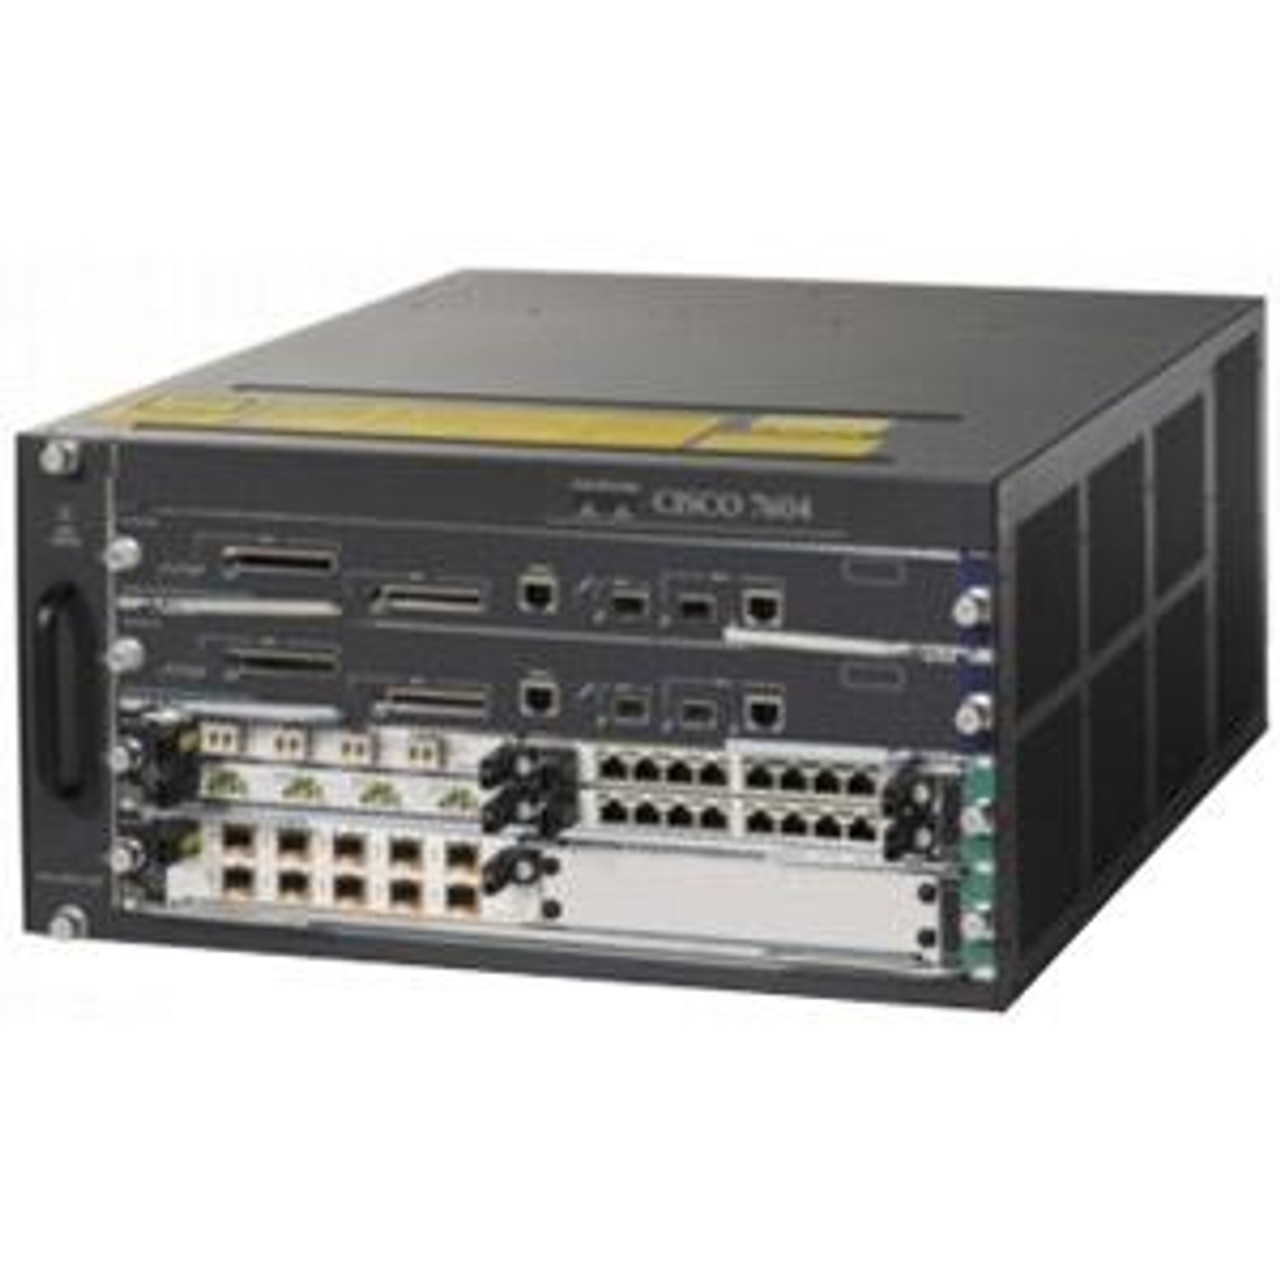 7604-2SUP720XL-2PS Cisco 7604 Router Chassis Ports4 Slots Rack-mountable (Refurbished)